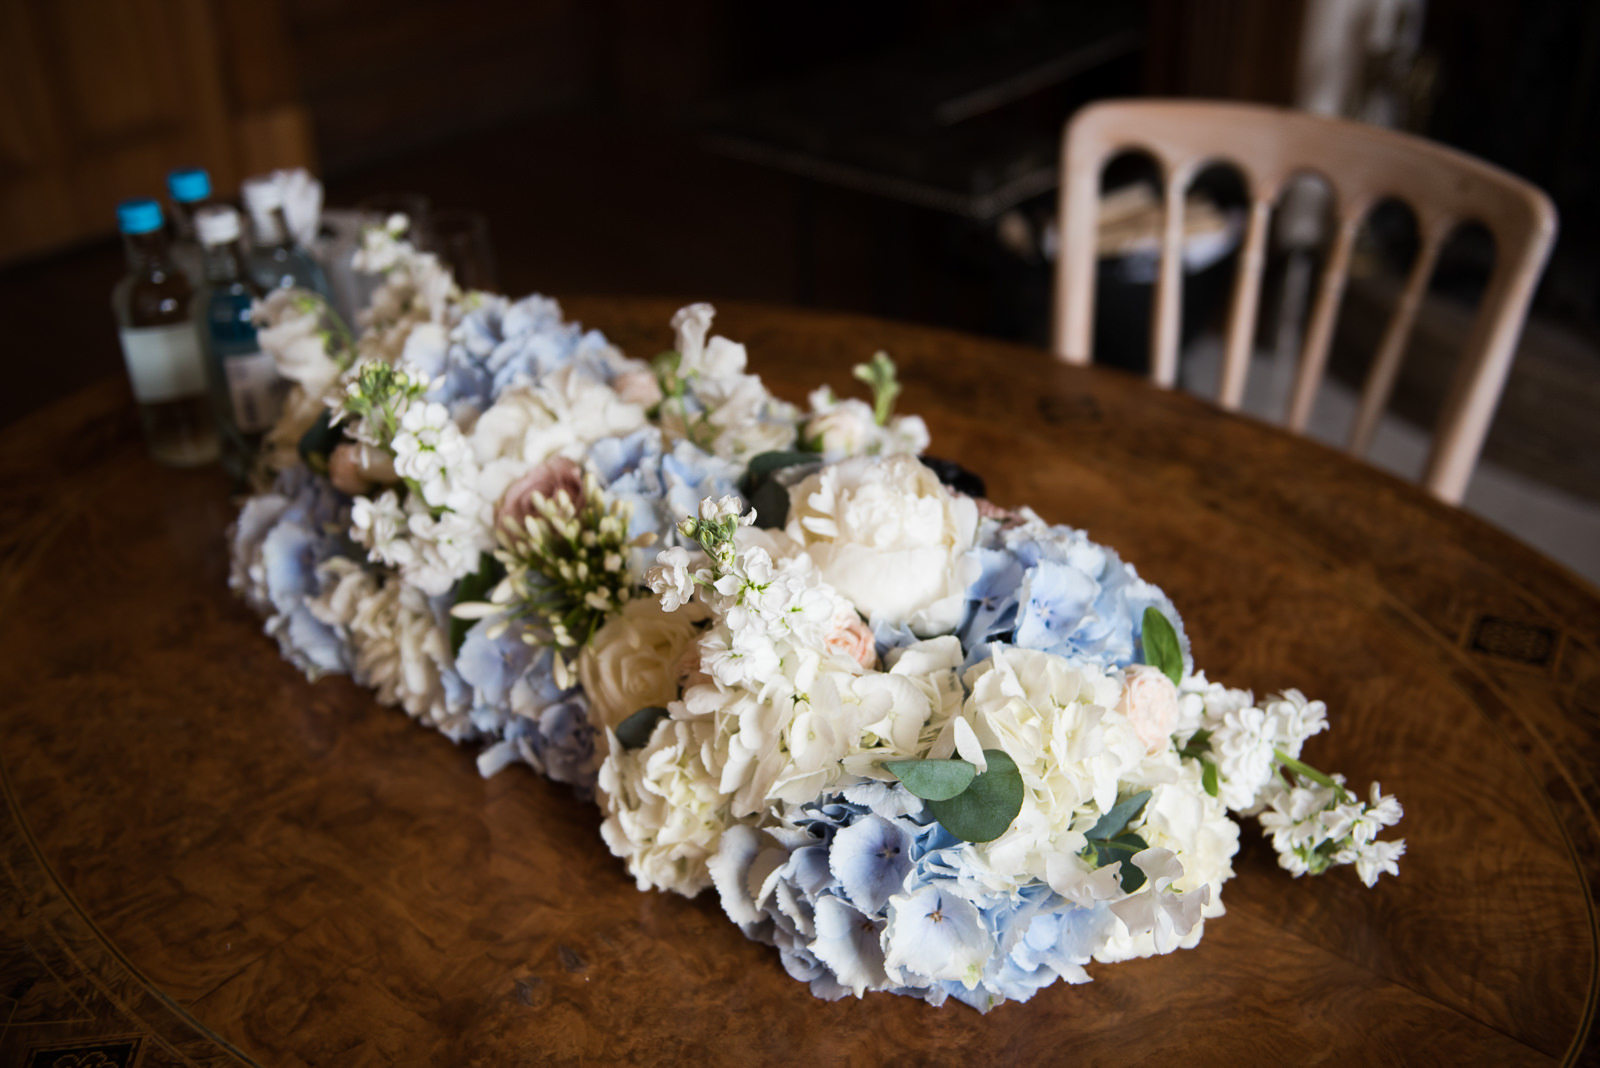 Powder blue hydrangea and white florals for a Spring wedding.